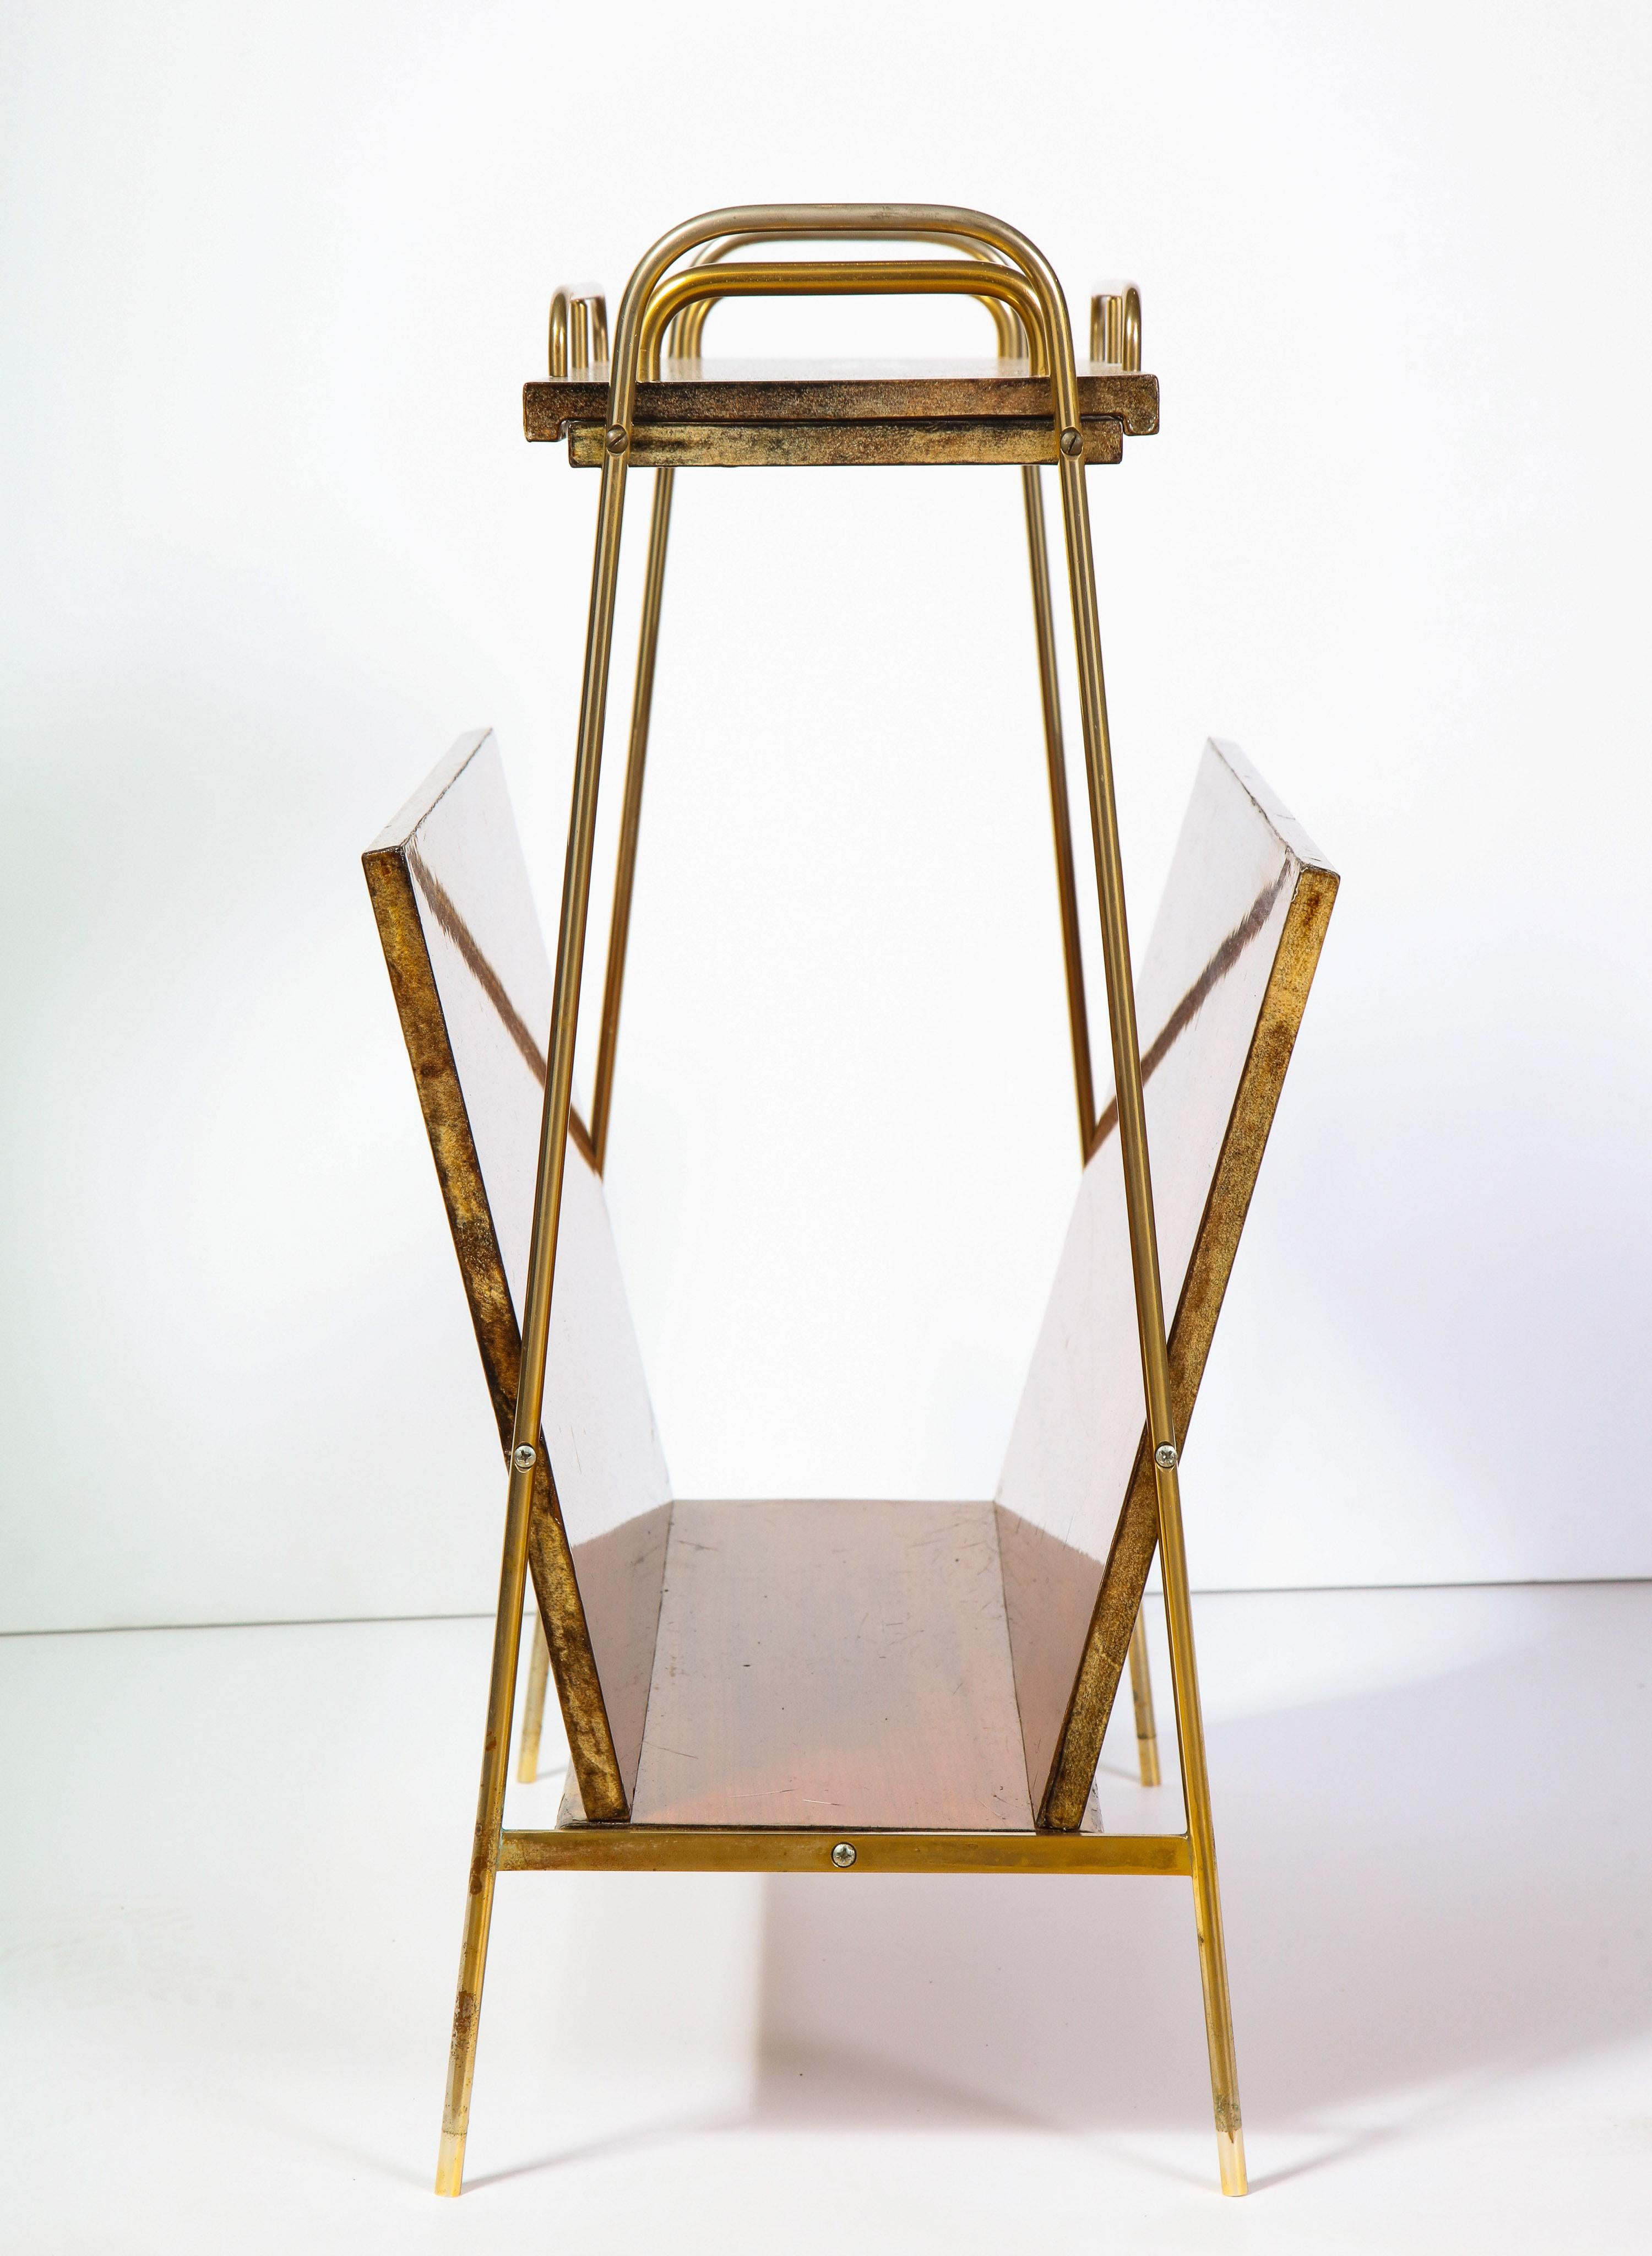 Magazine Stand by Aldo Tura, Goat Skin Parchment, Midcentury Italian, C 1950 For Sale 2